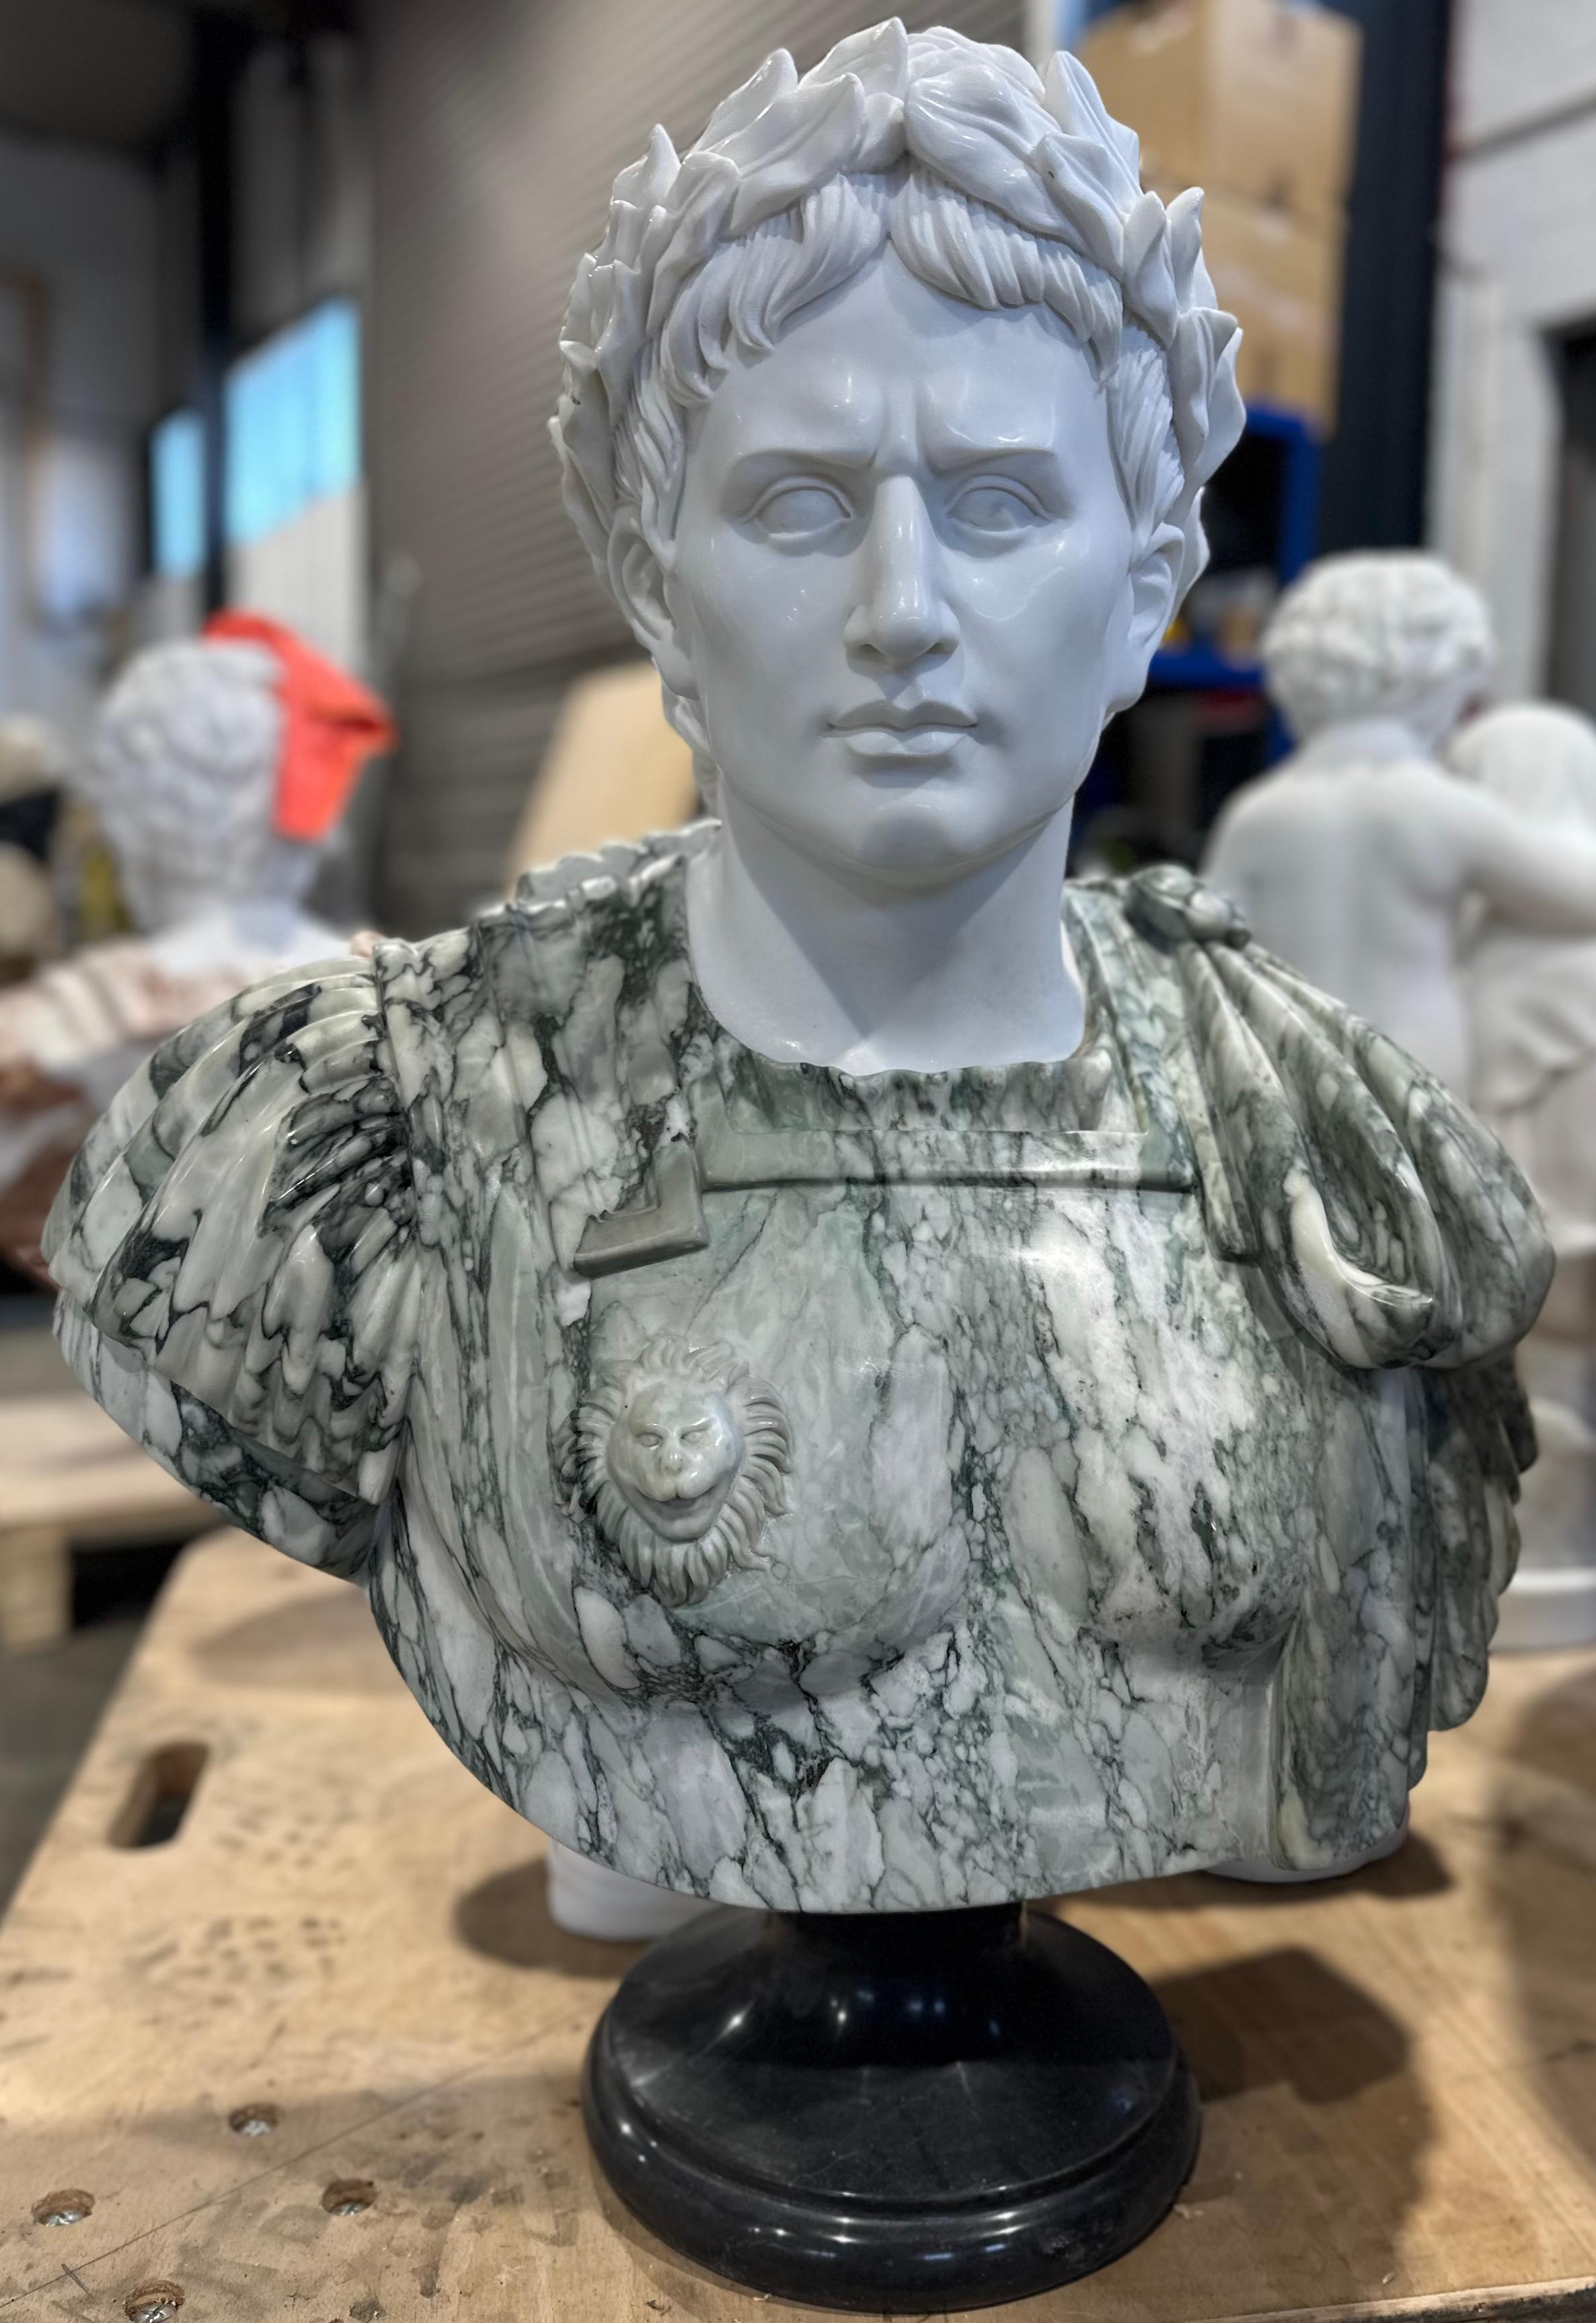 A striking green and white marble male bust. Detailed and skilfully carved with additional decoration on the breastplate showing a lions head. The males profile is presented with ruffled hair, clear features and wearing a intricate laurel wreath.